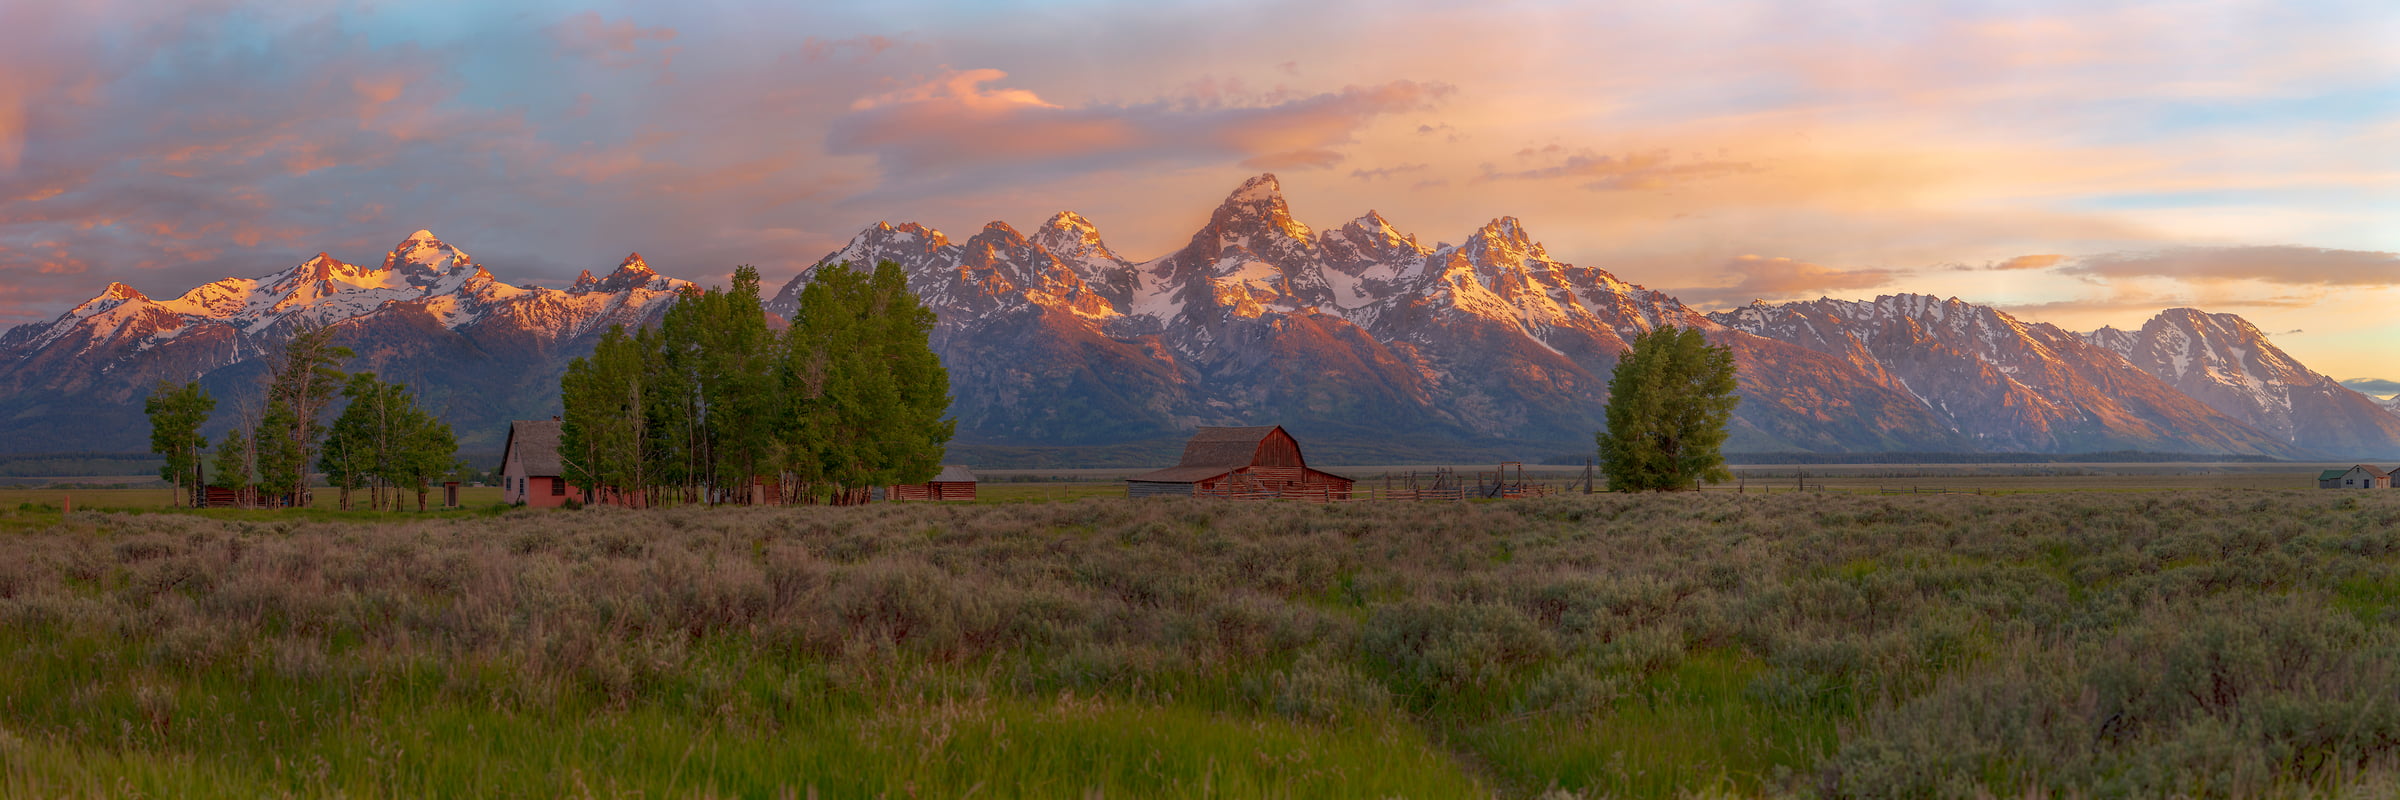 302 megapixels! A very high resolution, large-format VAST photo print of mountains, a field, and a barn in Wyoming; landscape photograph created by John Freeman.